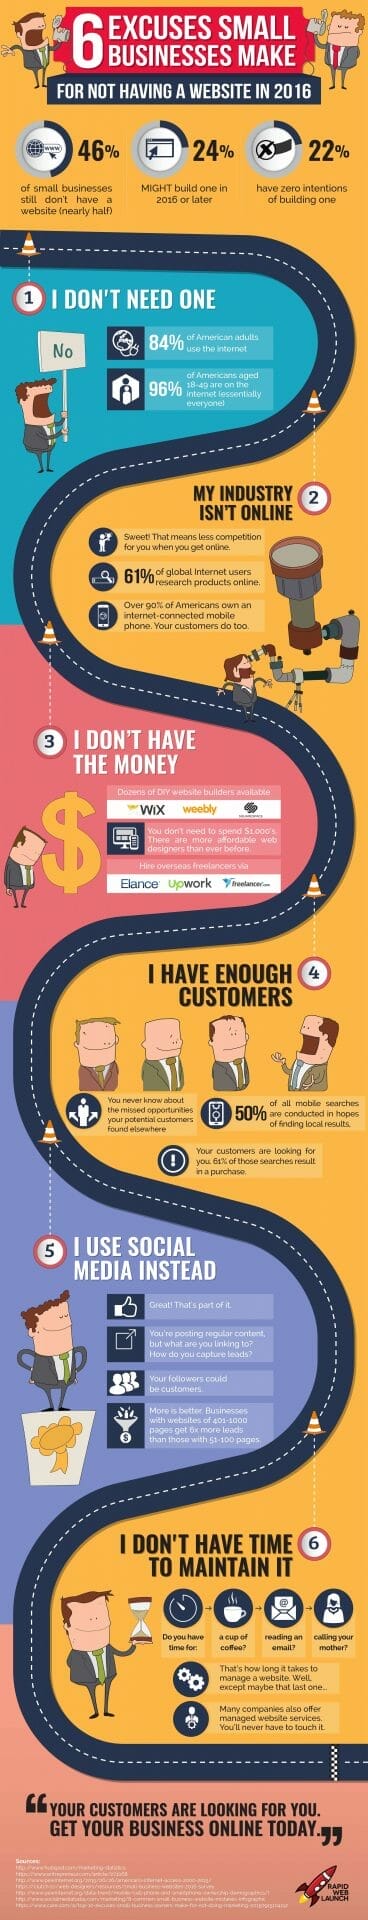 Not having a website,Small Businesses,Infographic Design Agency,Content marketing design agency